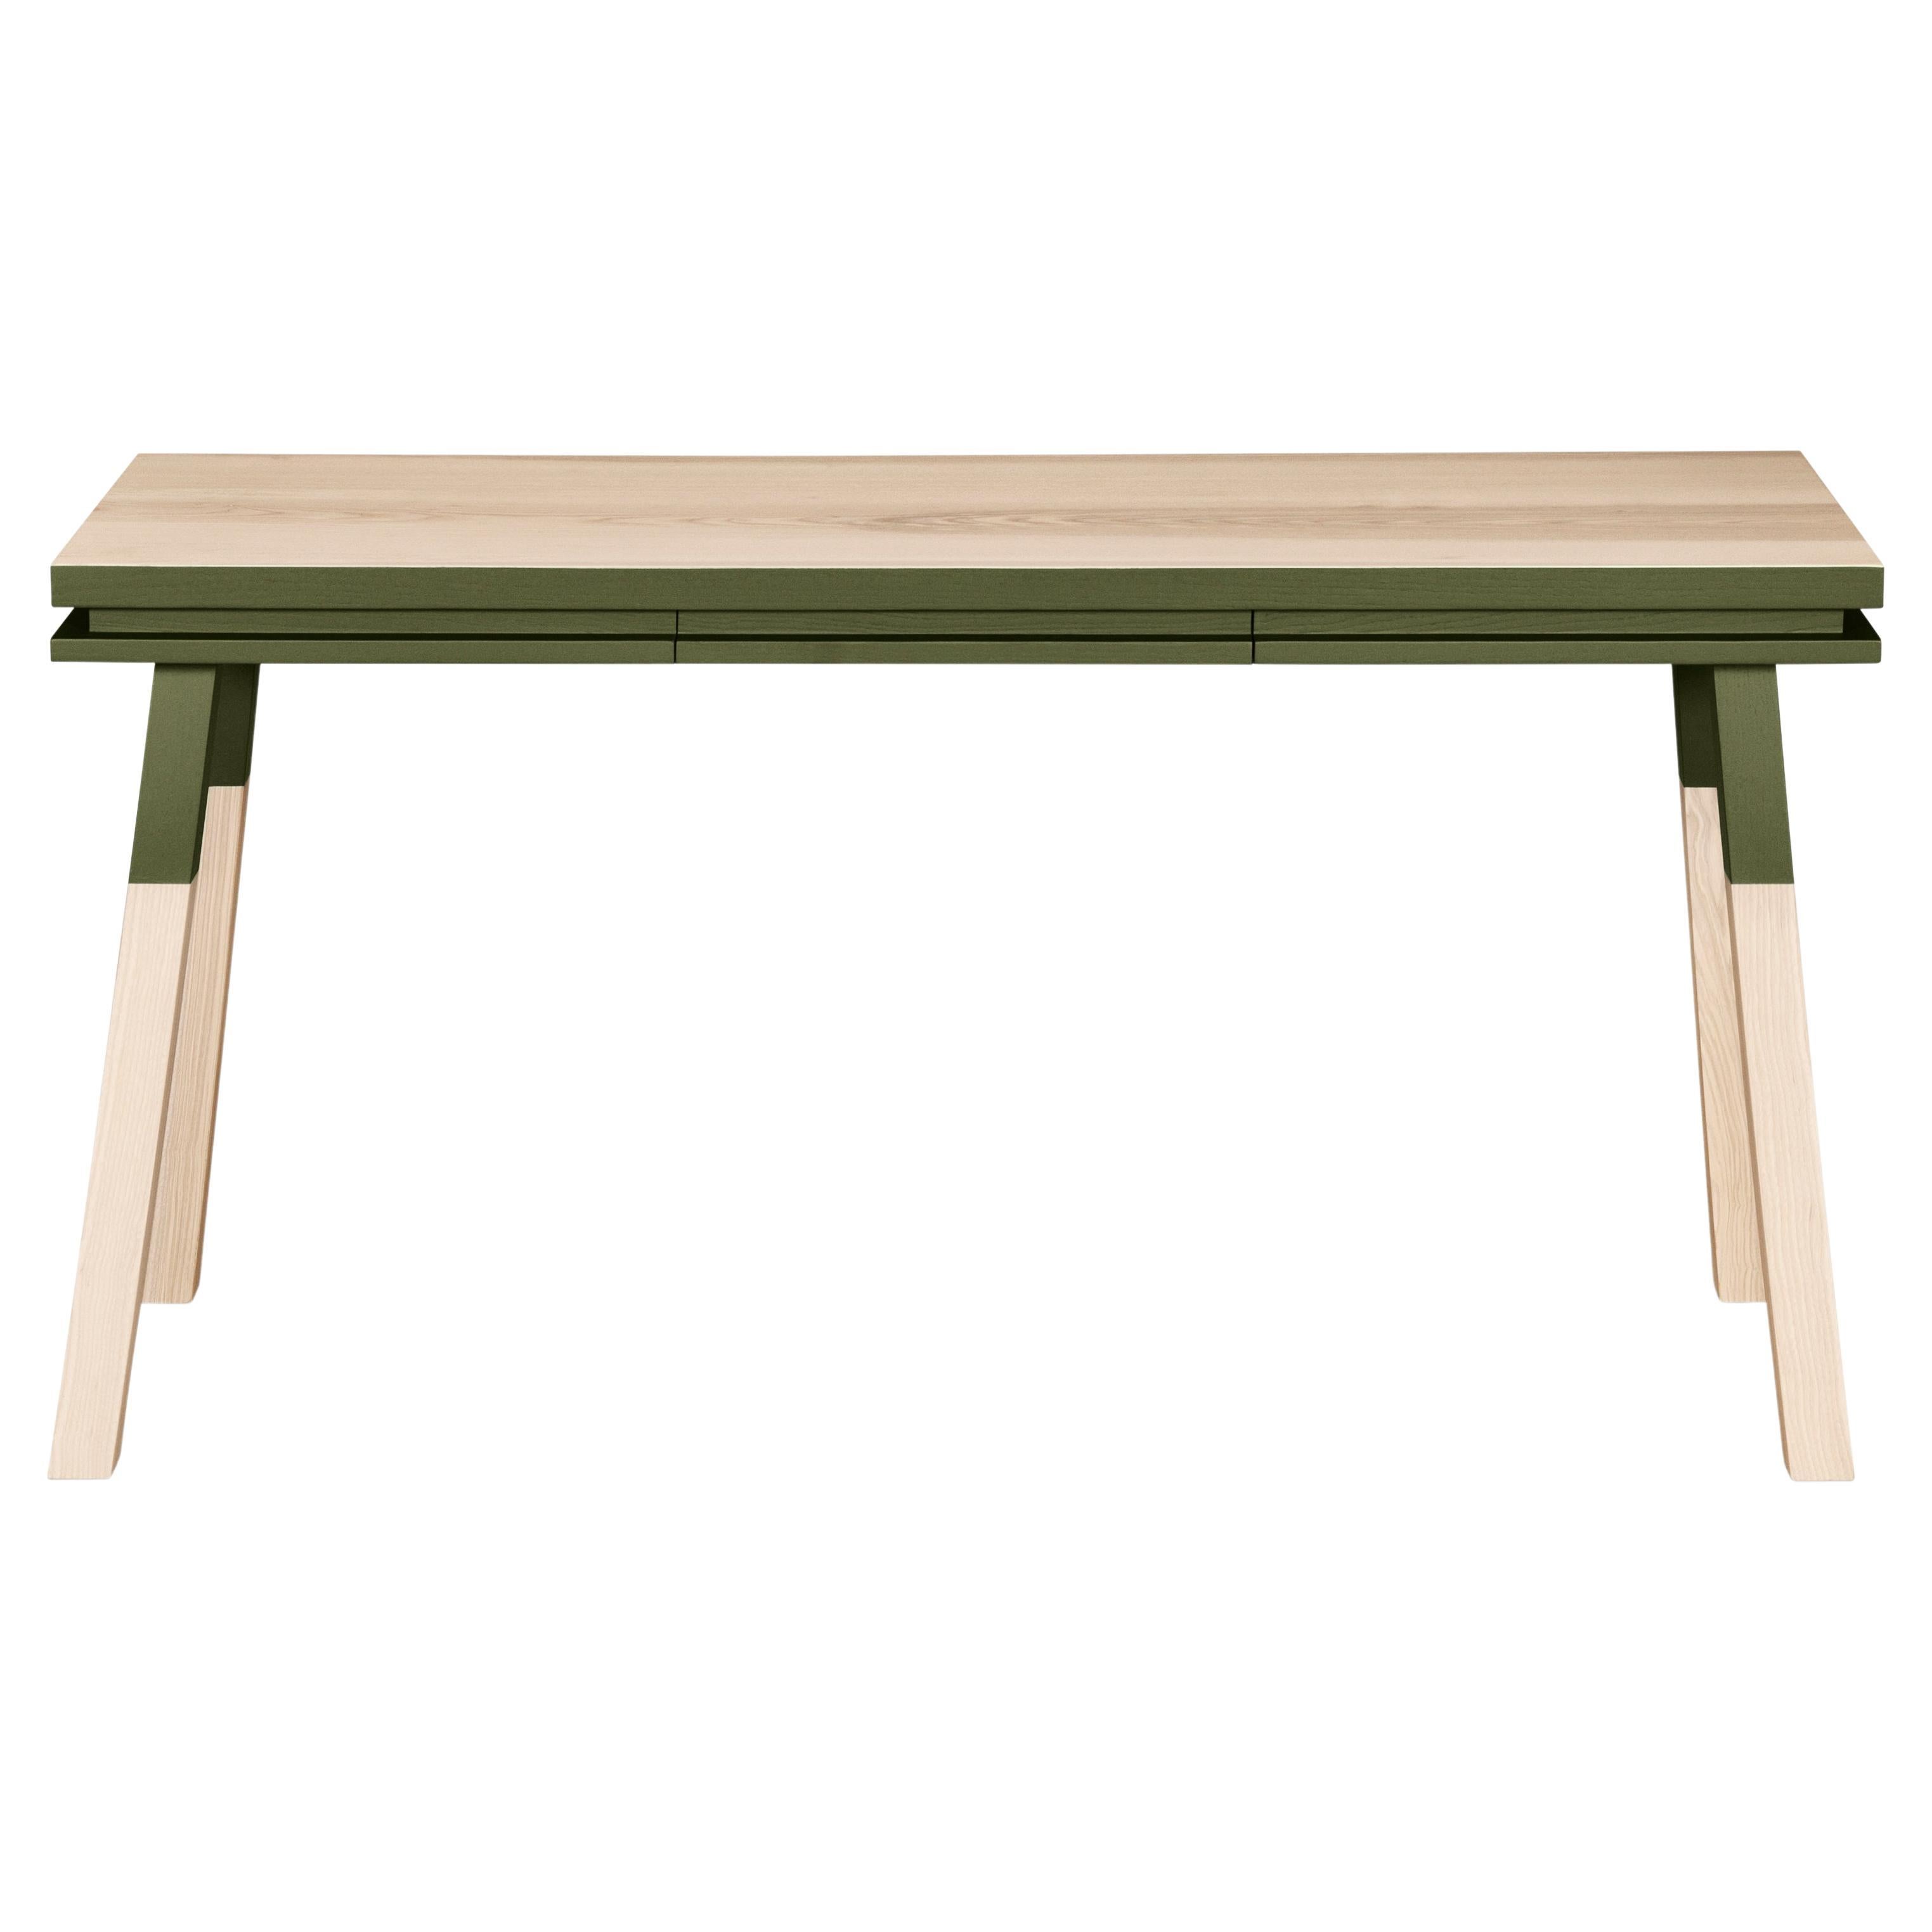 Green desk table in solid Ash, design by Eric Gizard, Paris - 11 colours